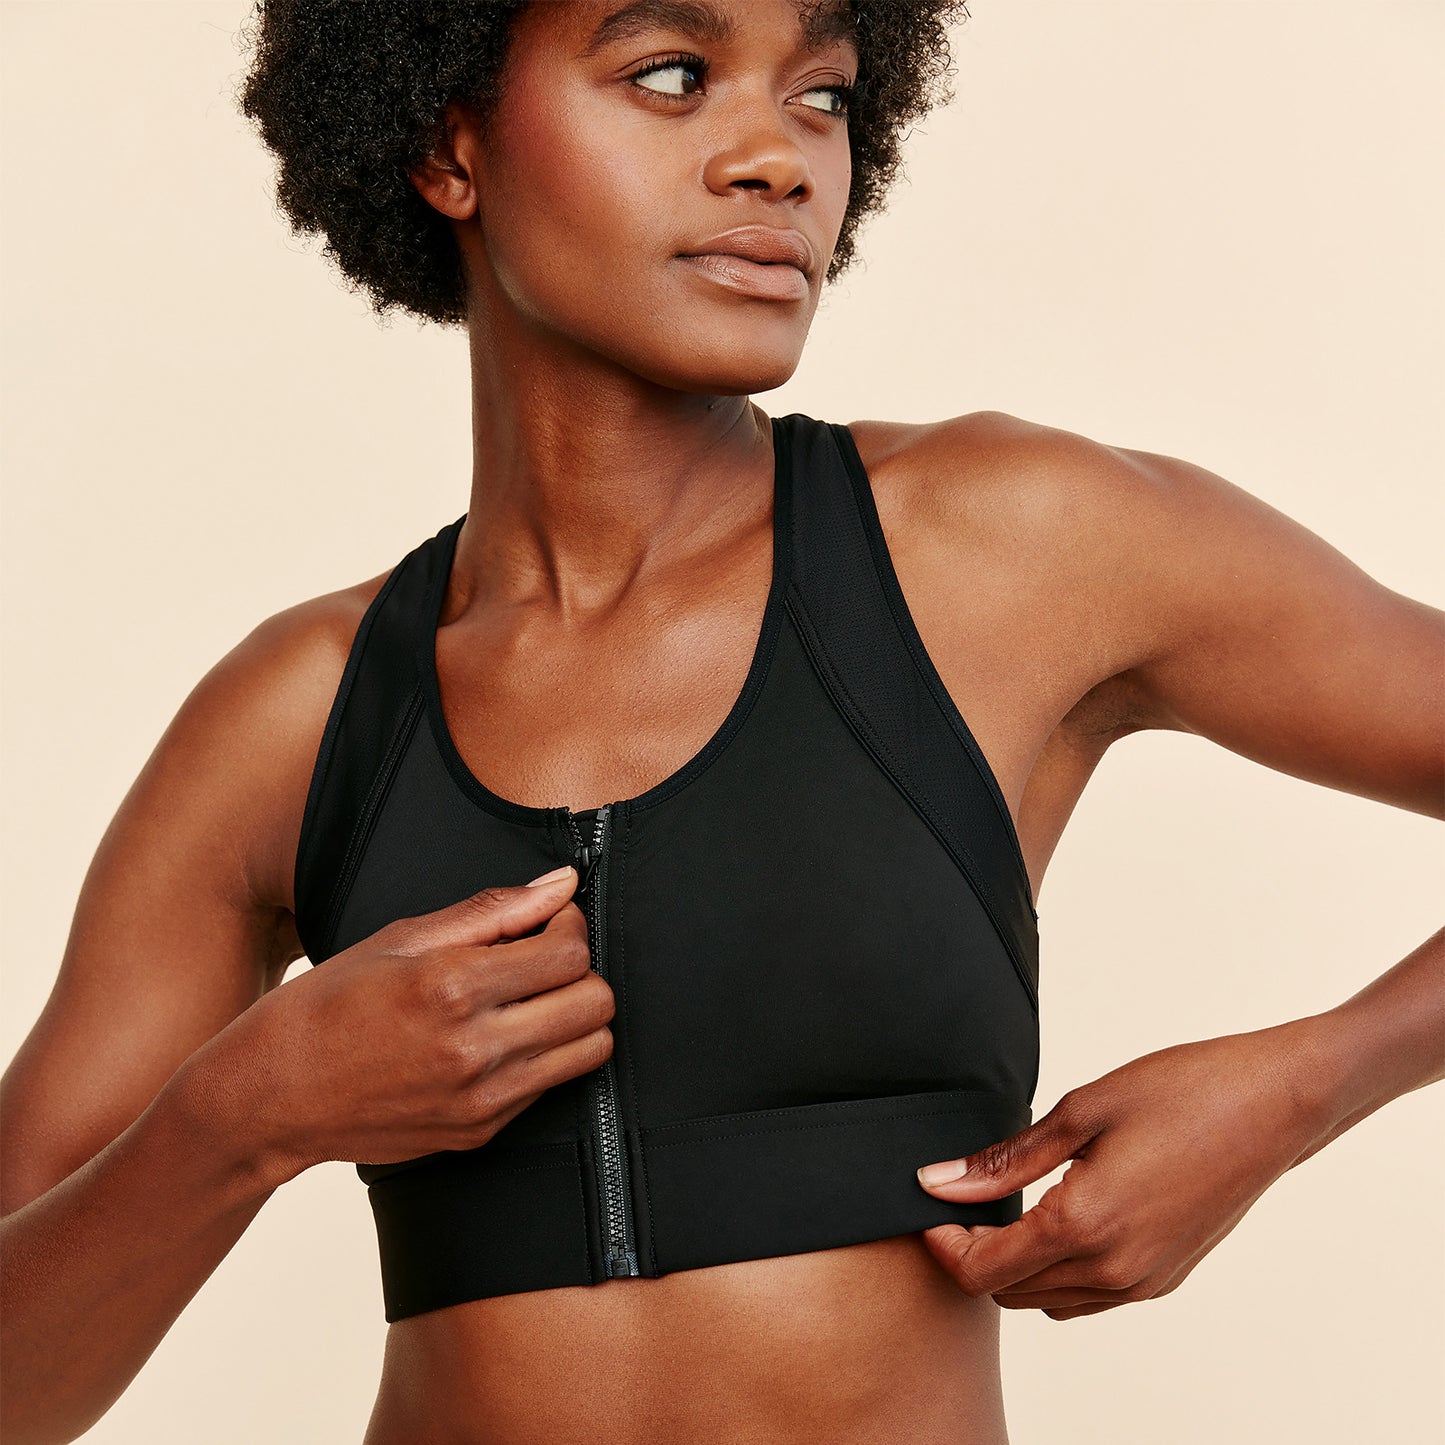 Picture of Black Front Closure Sports Bra Being Unzipped